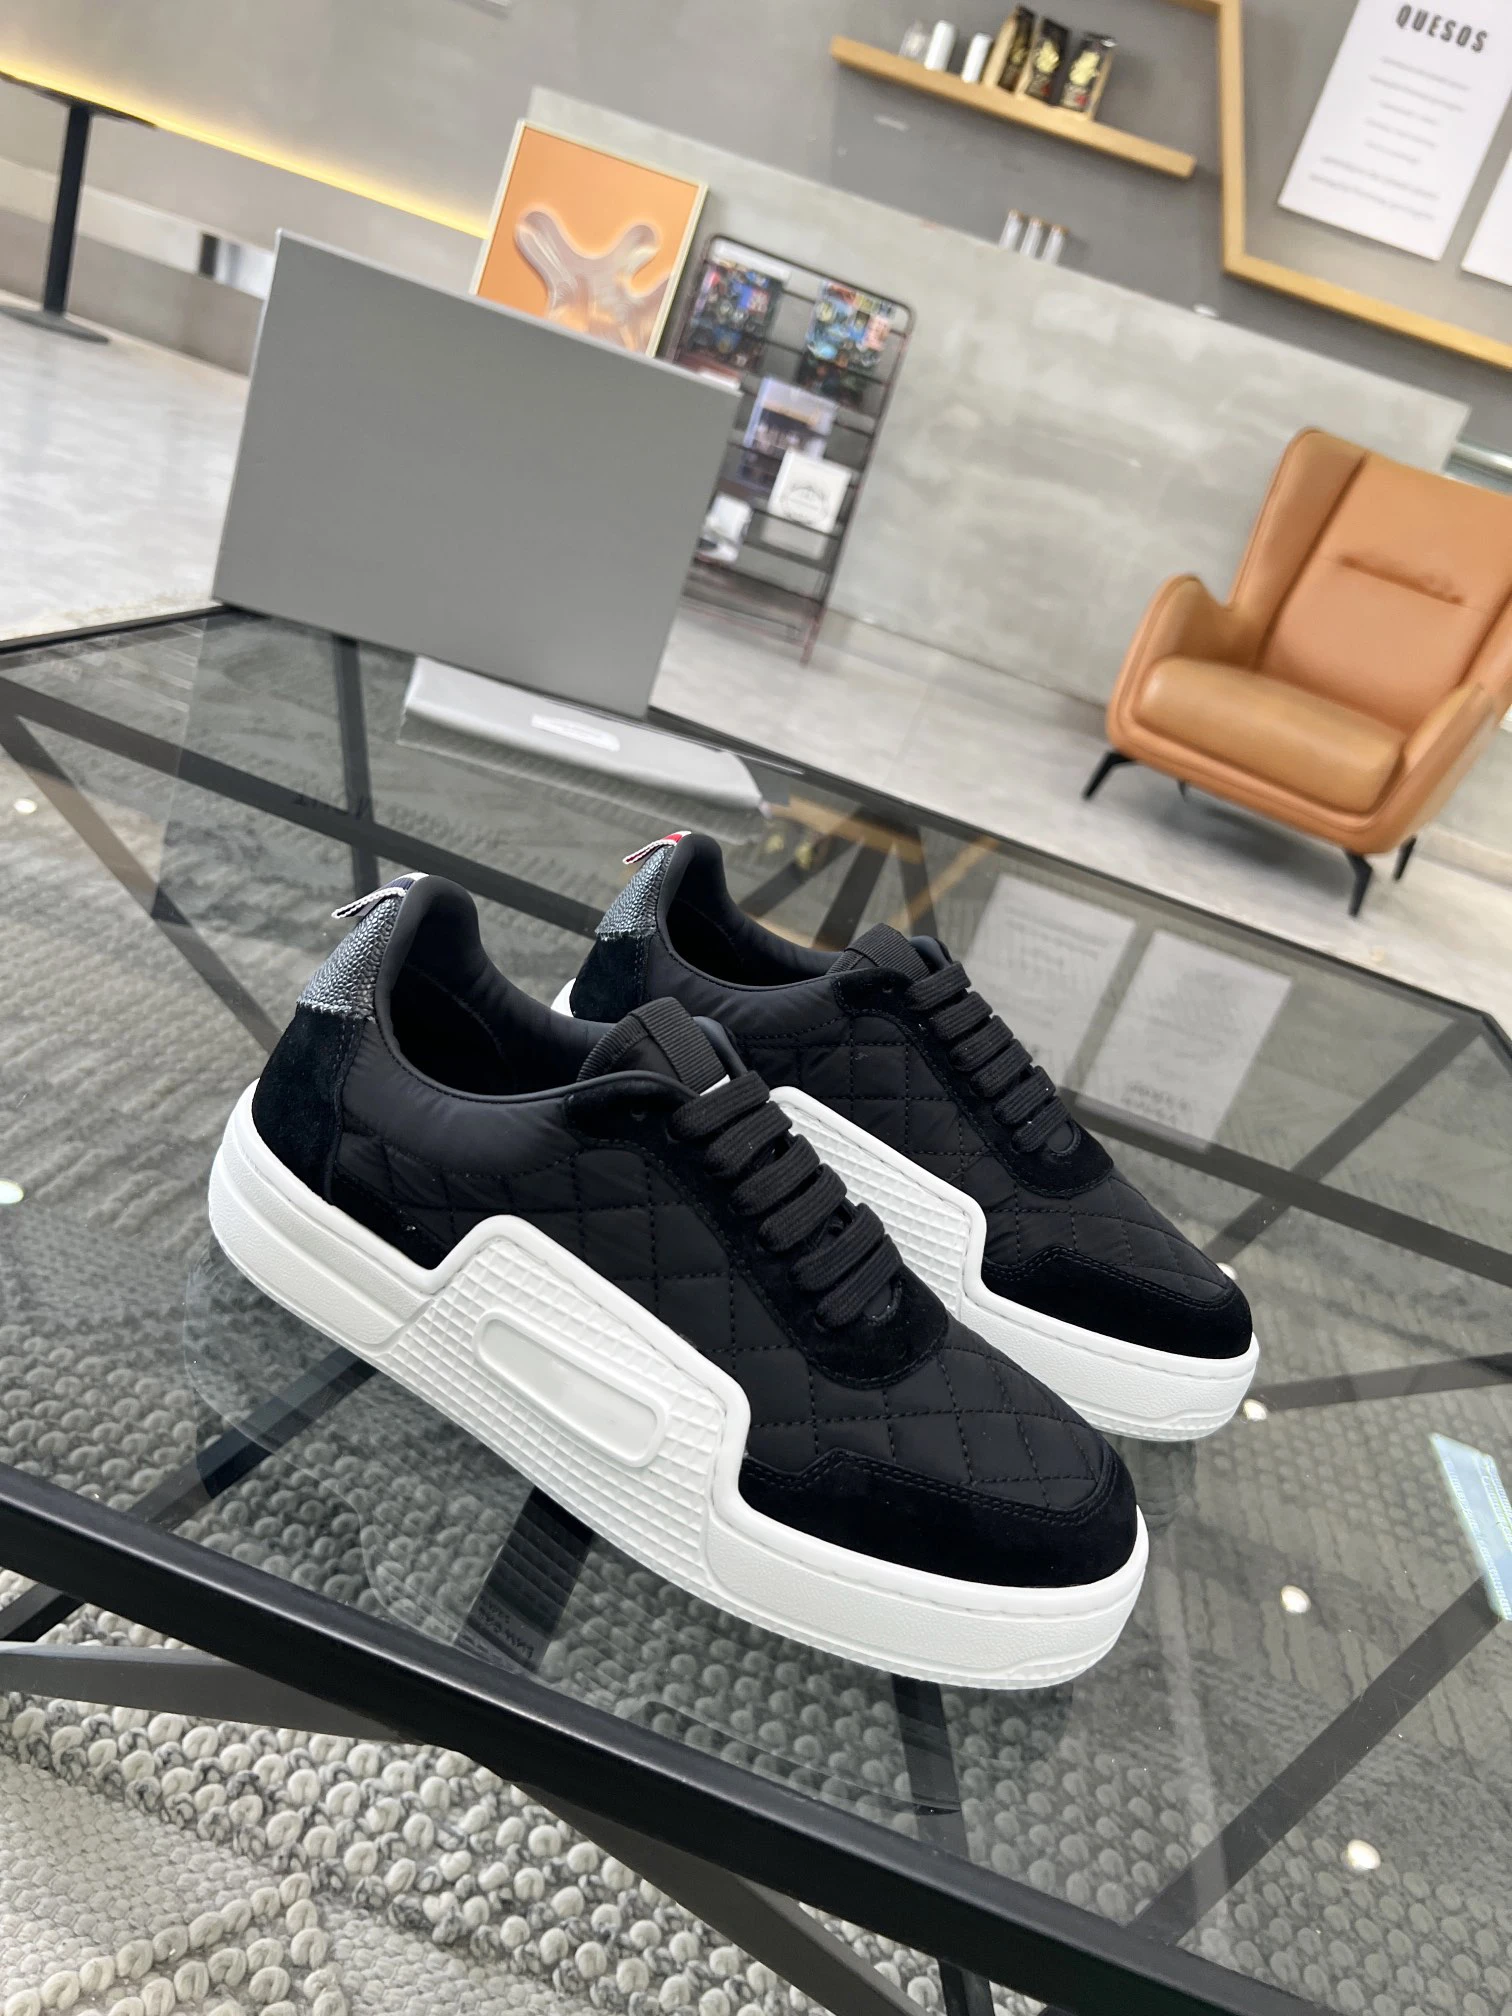 

TB THOM Men's Casual Black Shoes Korean Style Contrast Color Design Canvas Shoes New Fashion Cloth Cover Increased Sneakers